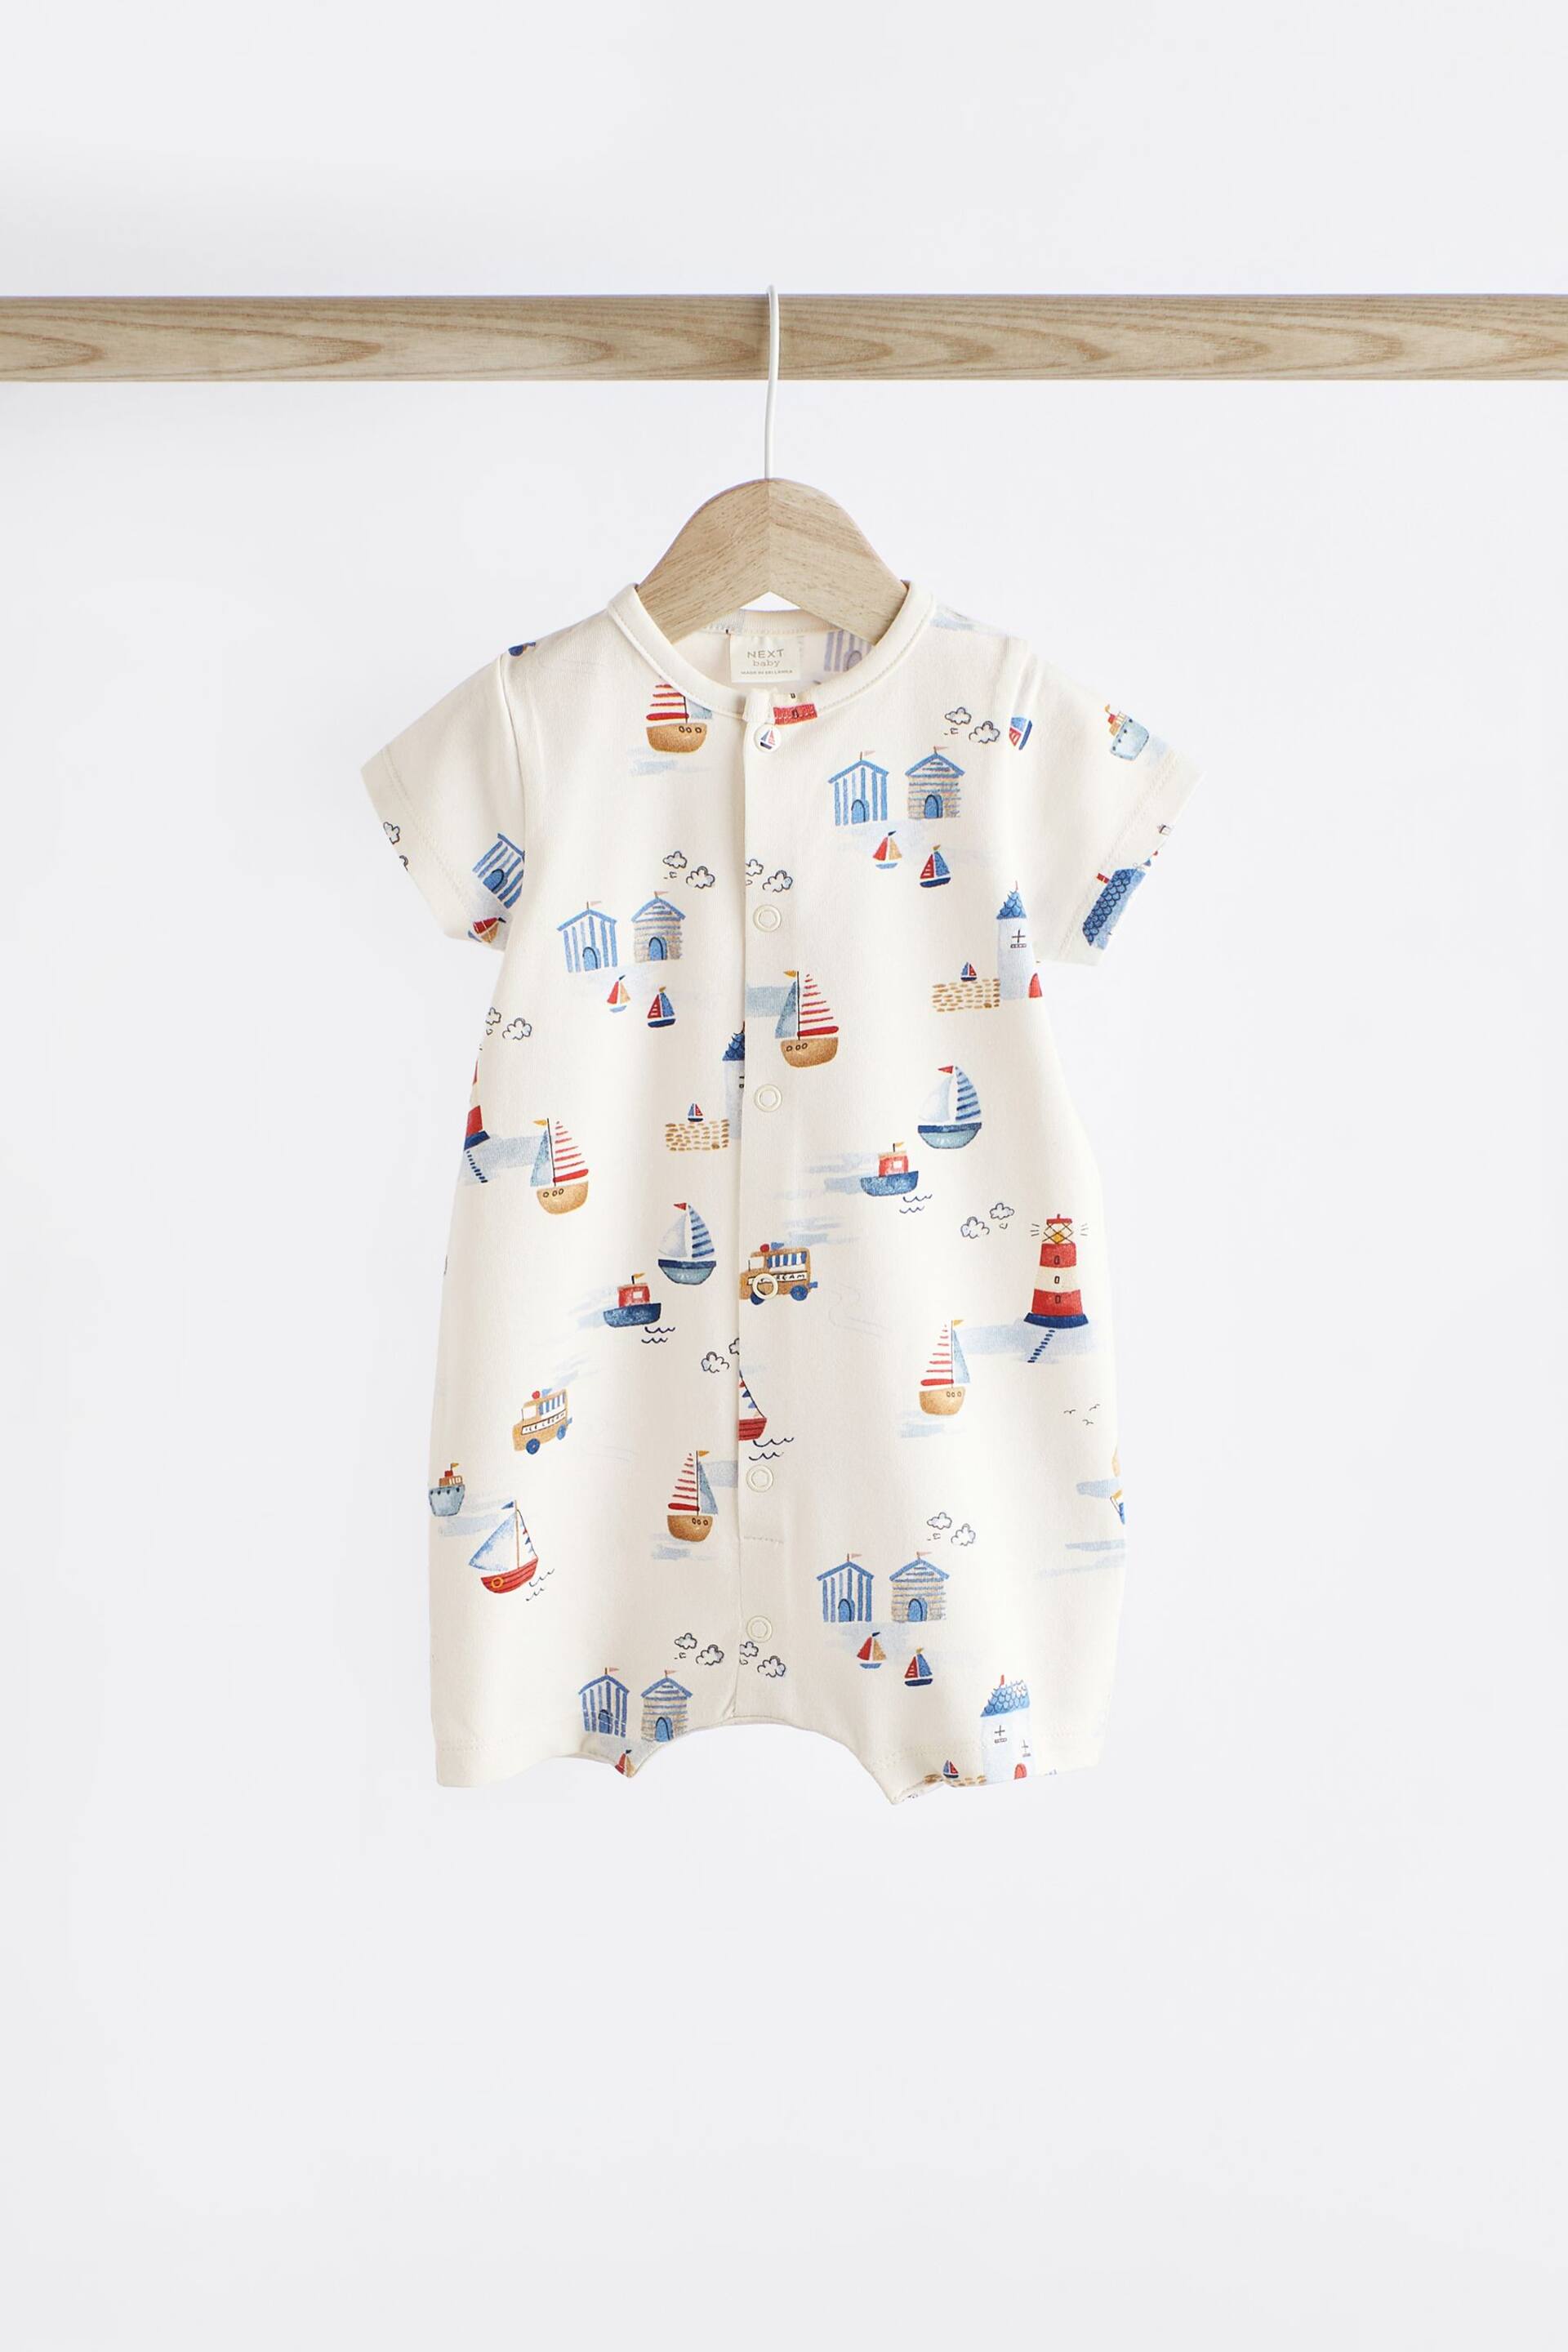 Blue Boat Baby Jersey Rompers 3 Pack - Image 5 of 10